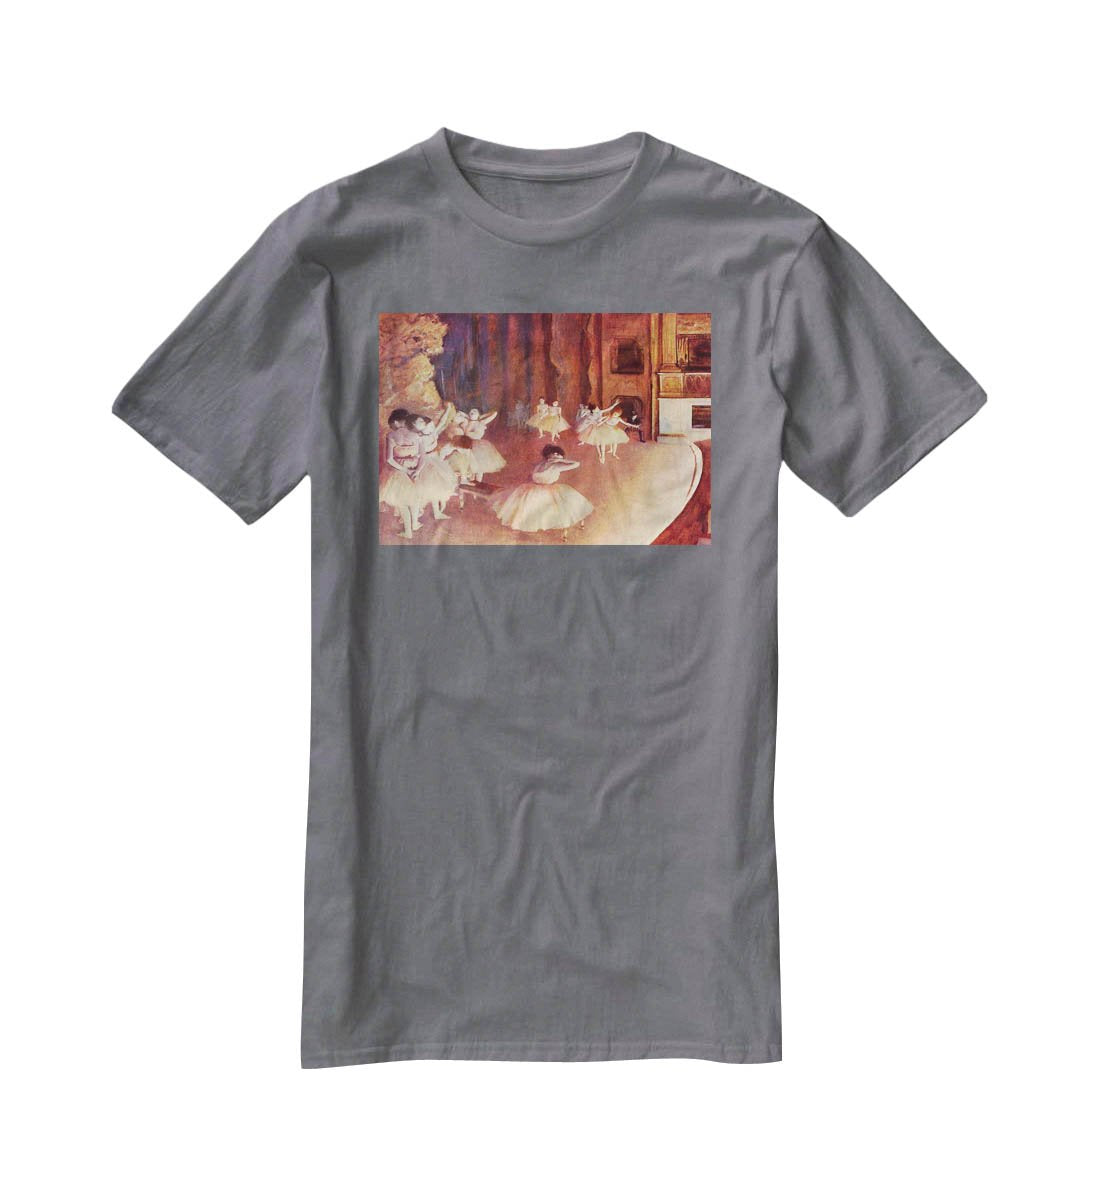 Dress rehearsal of the ballet on the stage by Degas T-Shirt - Canvas Art Rocks - 3